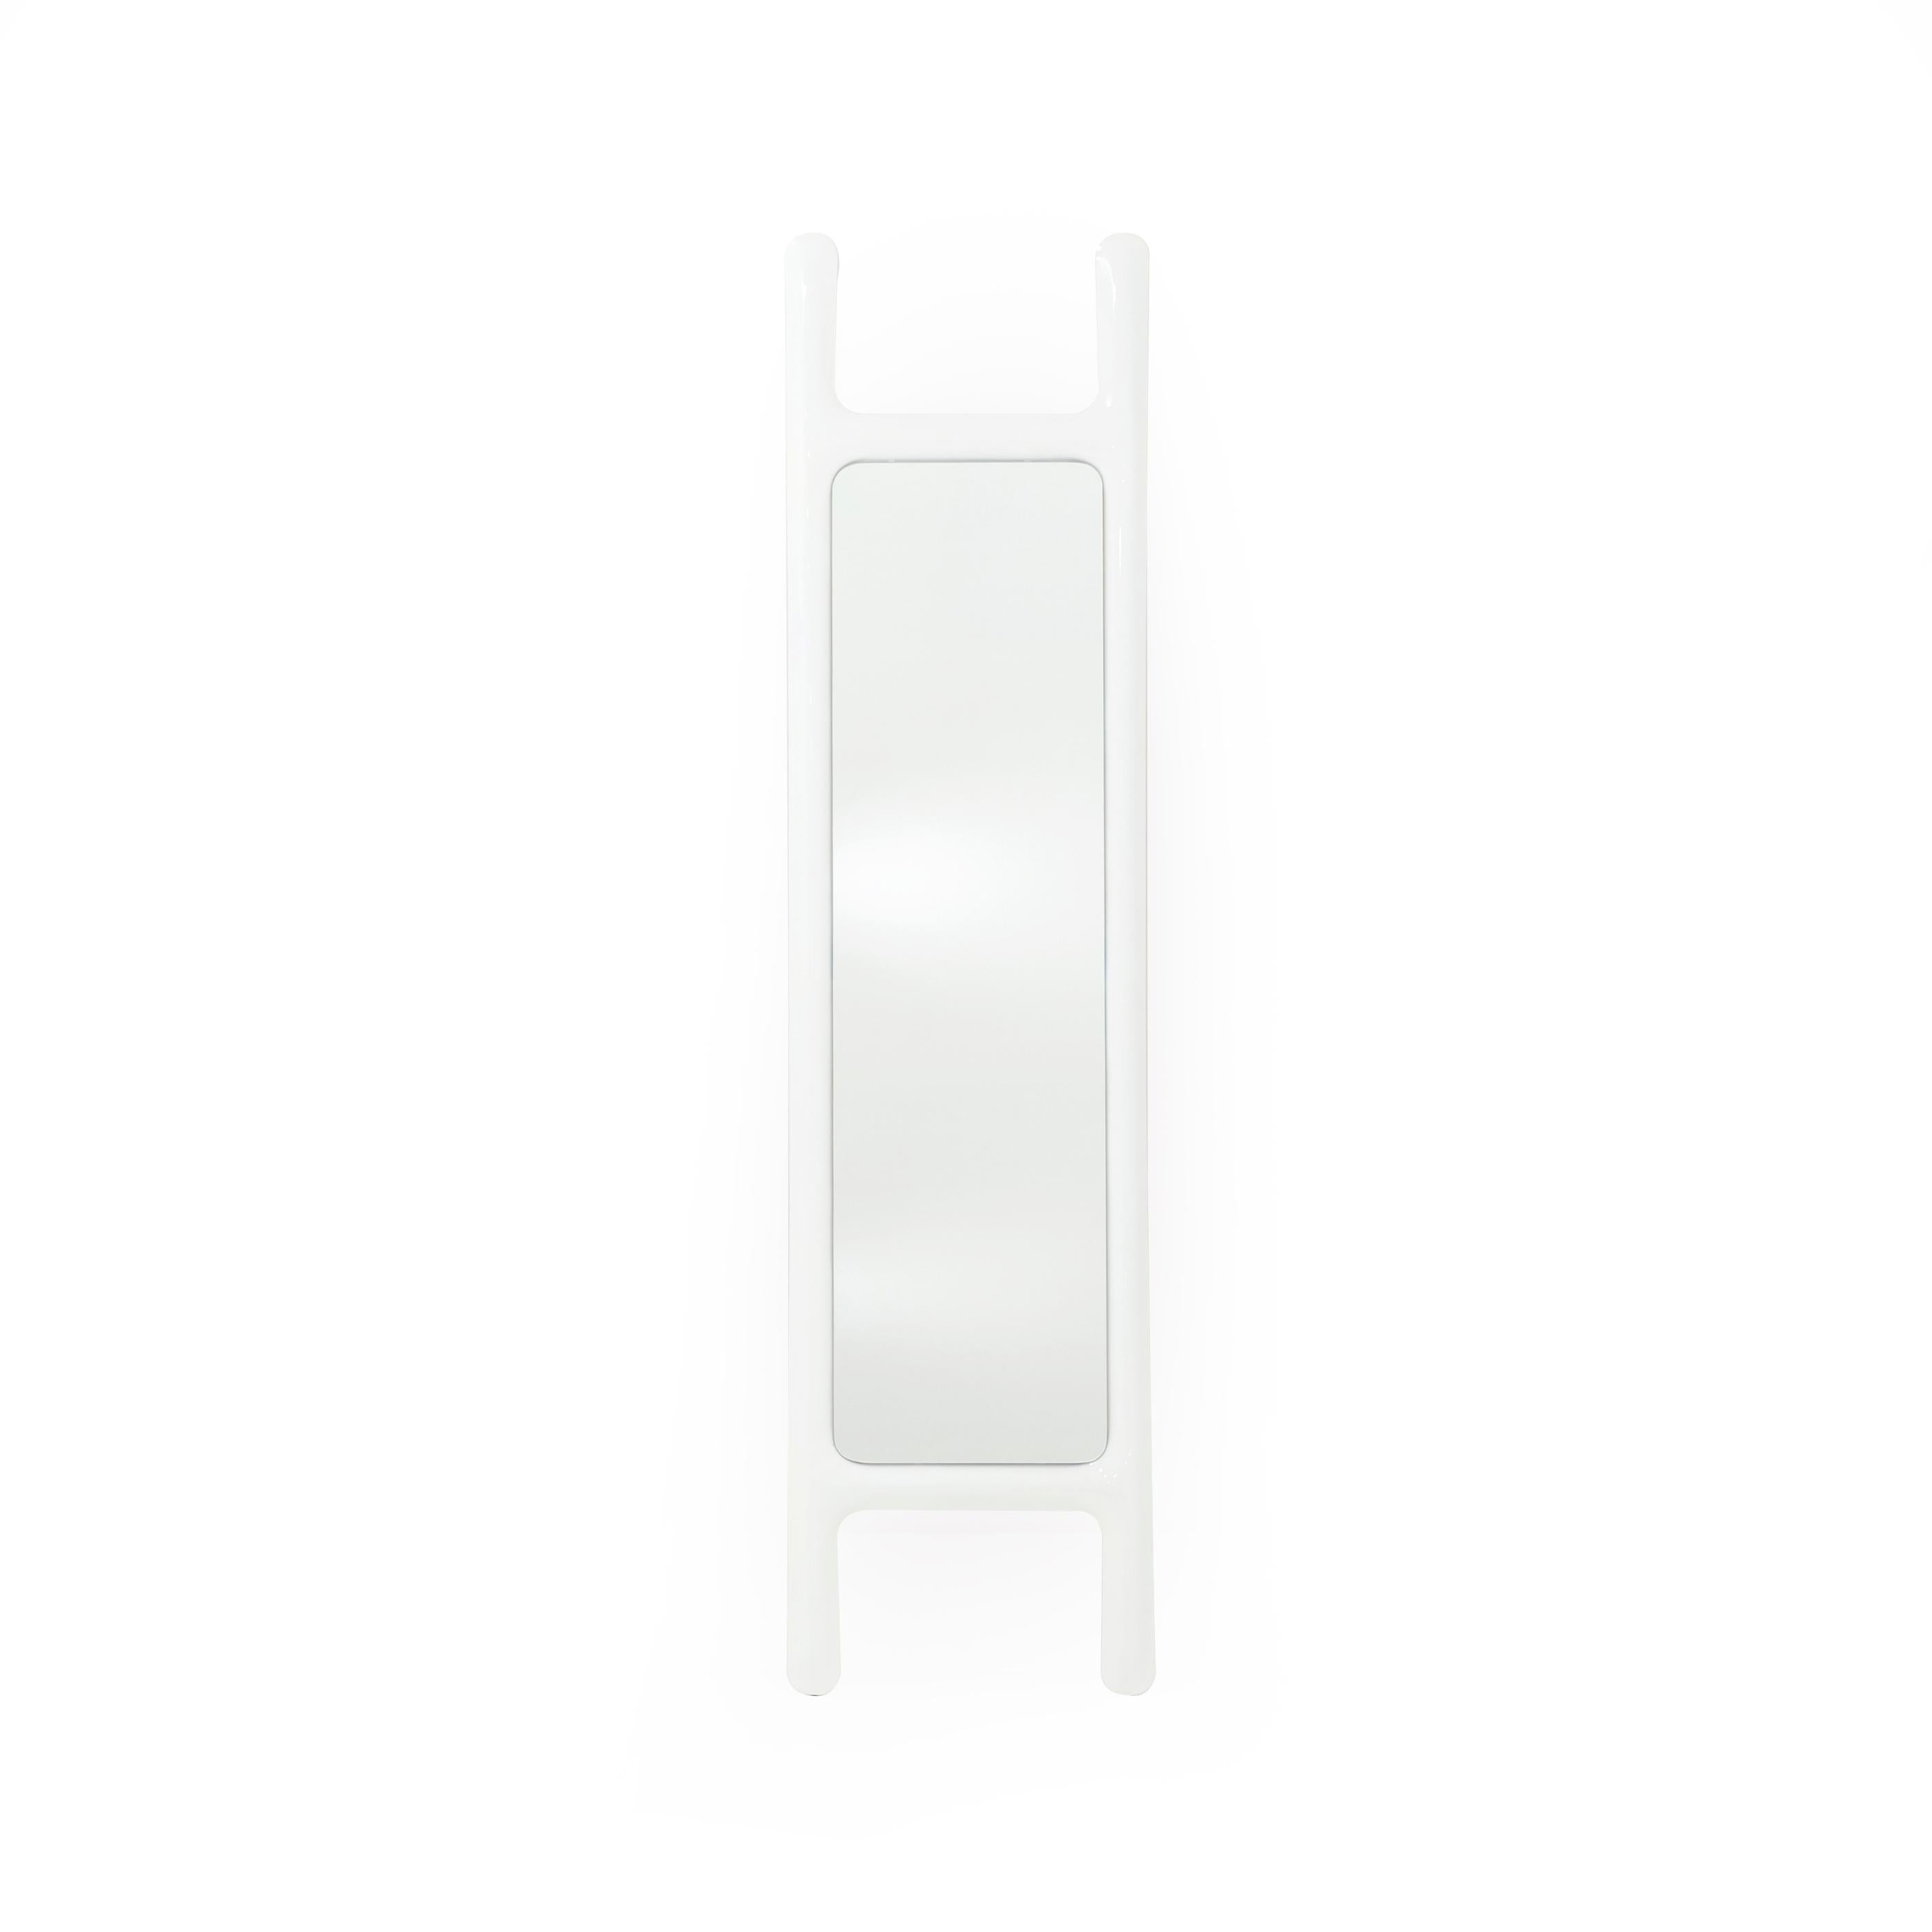 White drab sculptural wall mirror by Zieta
Dimensions: D 6 x W 46 x H 188 cm 
Material: Mirror, carbon steel. 
Finish: Powder-coated in white glossy.
Also available in colors: stainless steel, or powder-coated. 


A DRAB mirror is an object